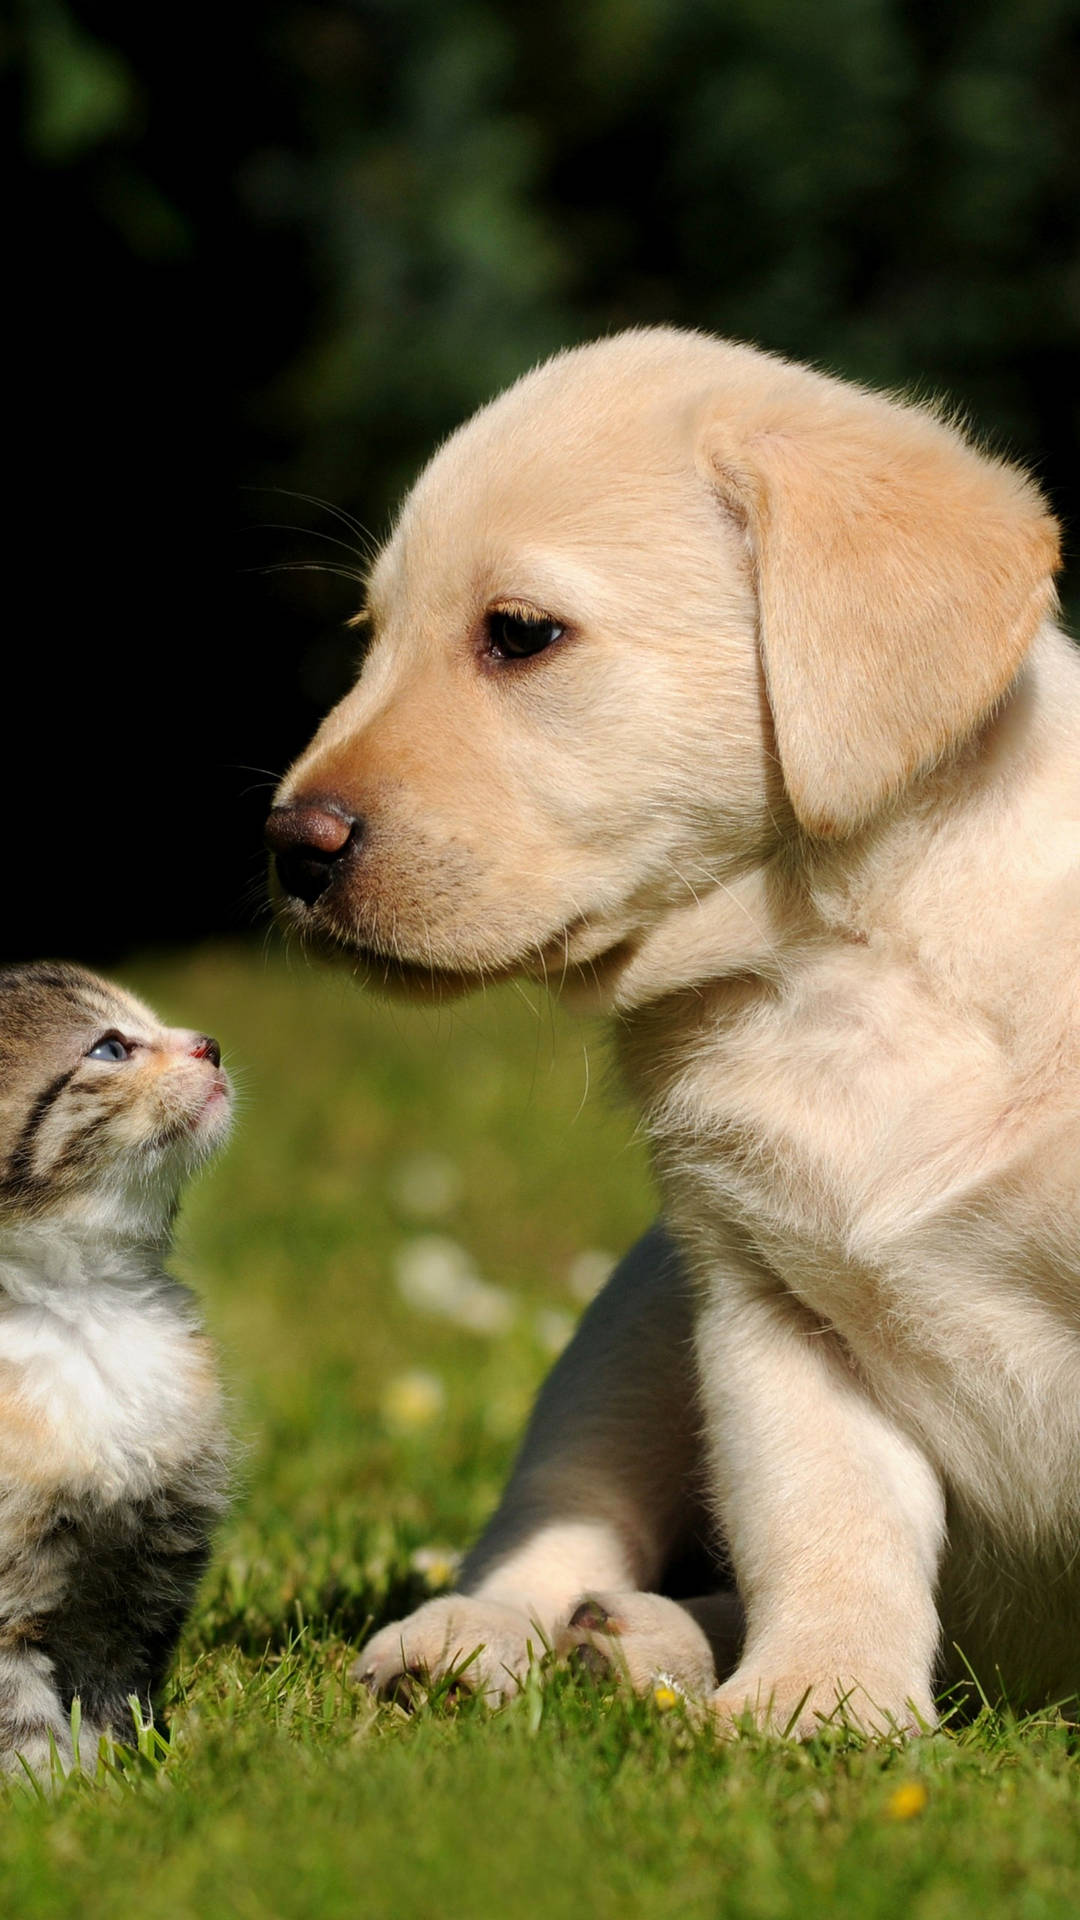 Cat And Dog Looking At Each Other Wallpaper